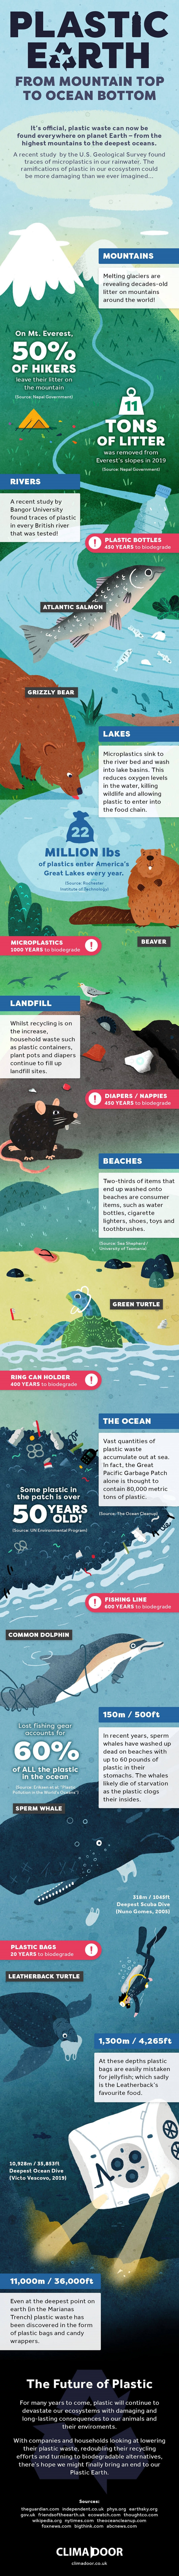 Infographic: How Plastic Pollution Affects Our Planet